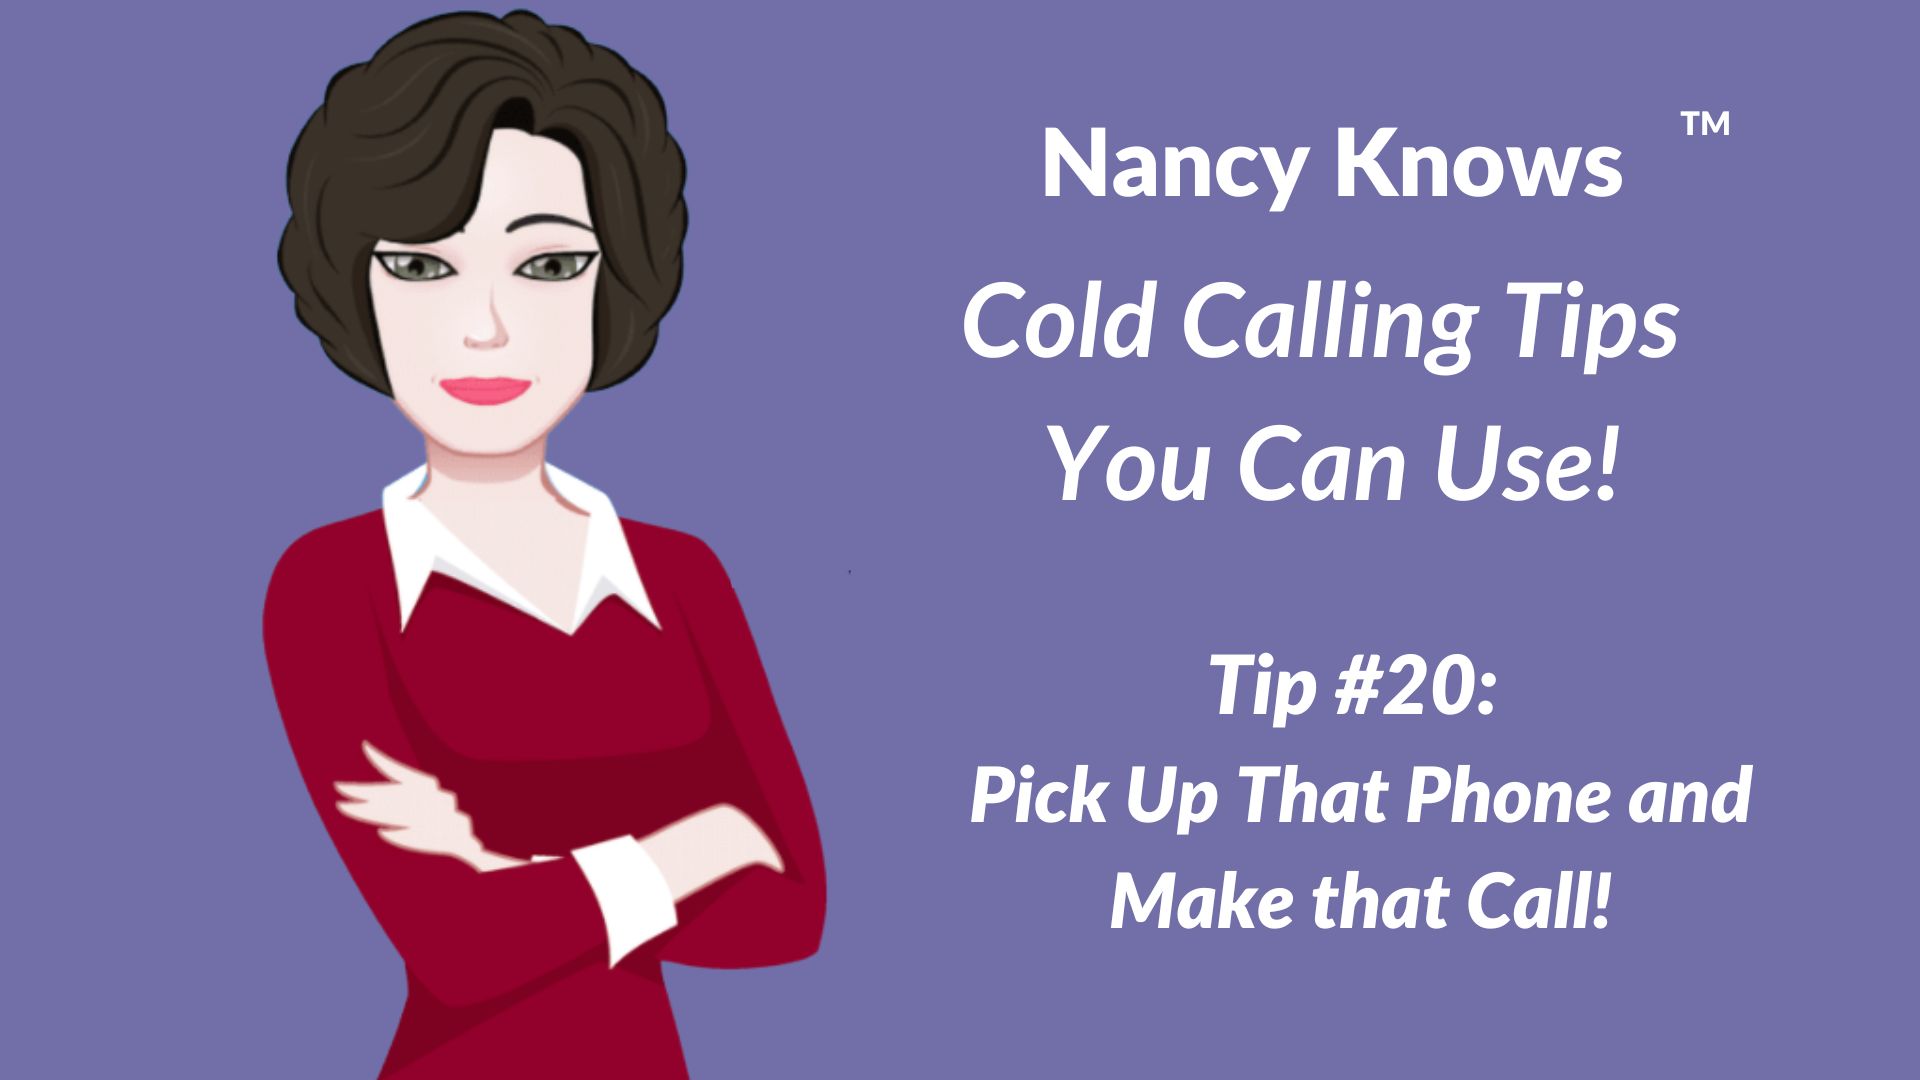 Nancy Knows #20: Pick Up That Phone and Make That Call